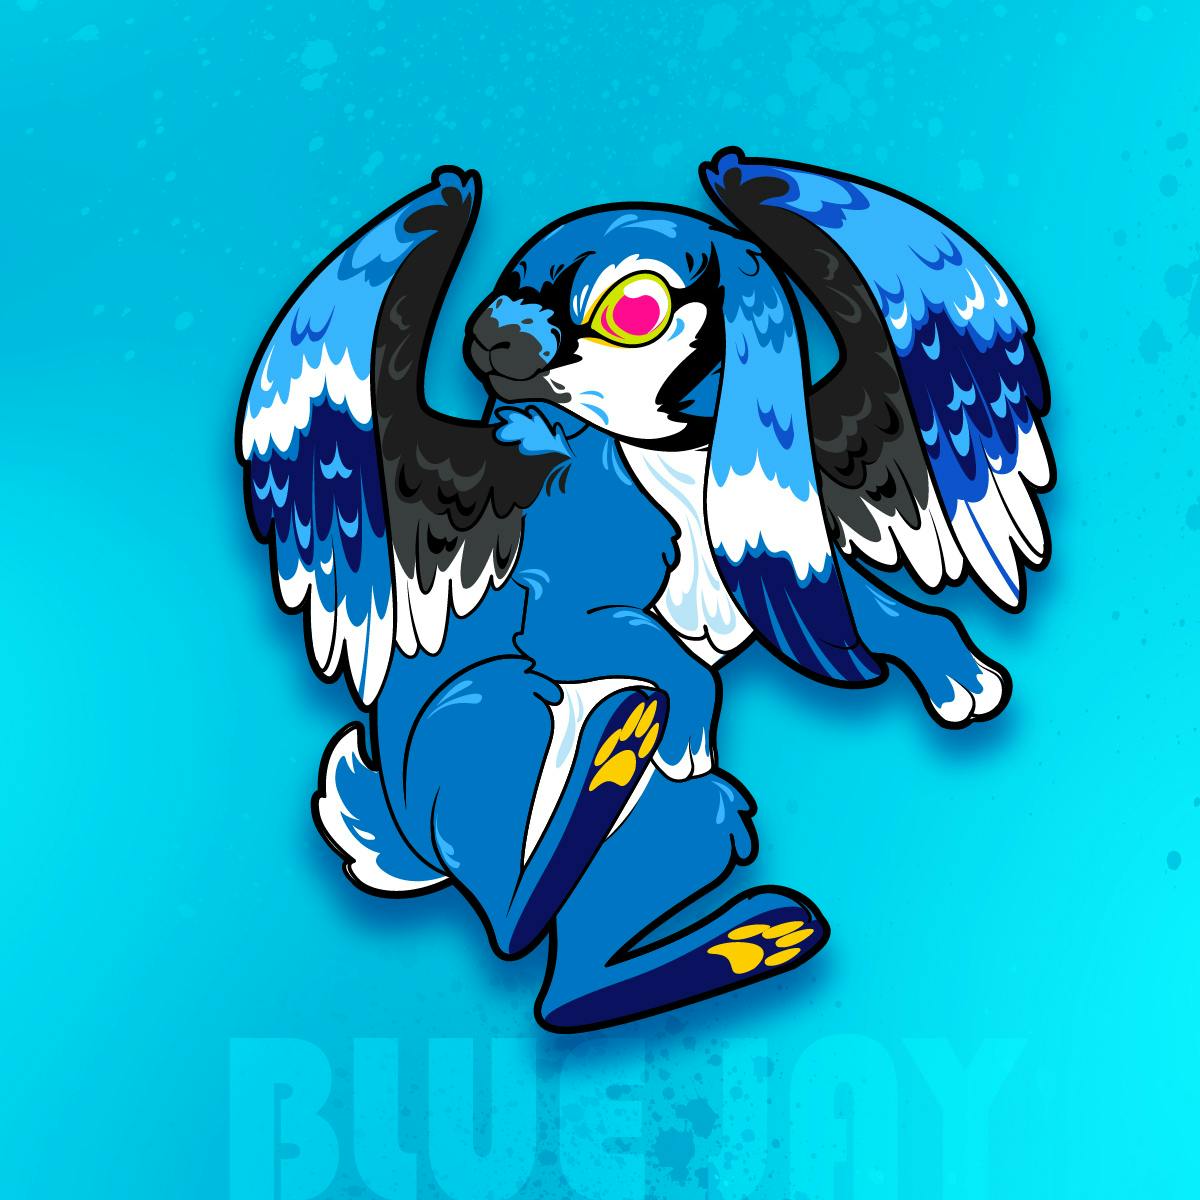 Can you believe we UNLOCKED the Bluejay Wabbit?!